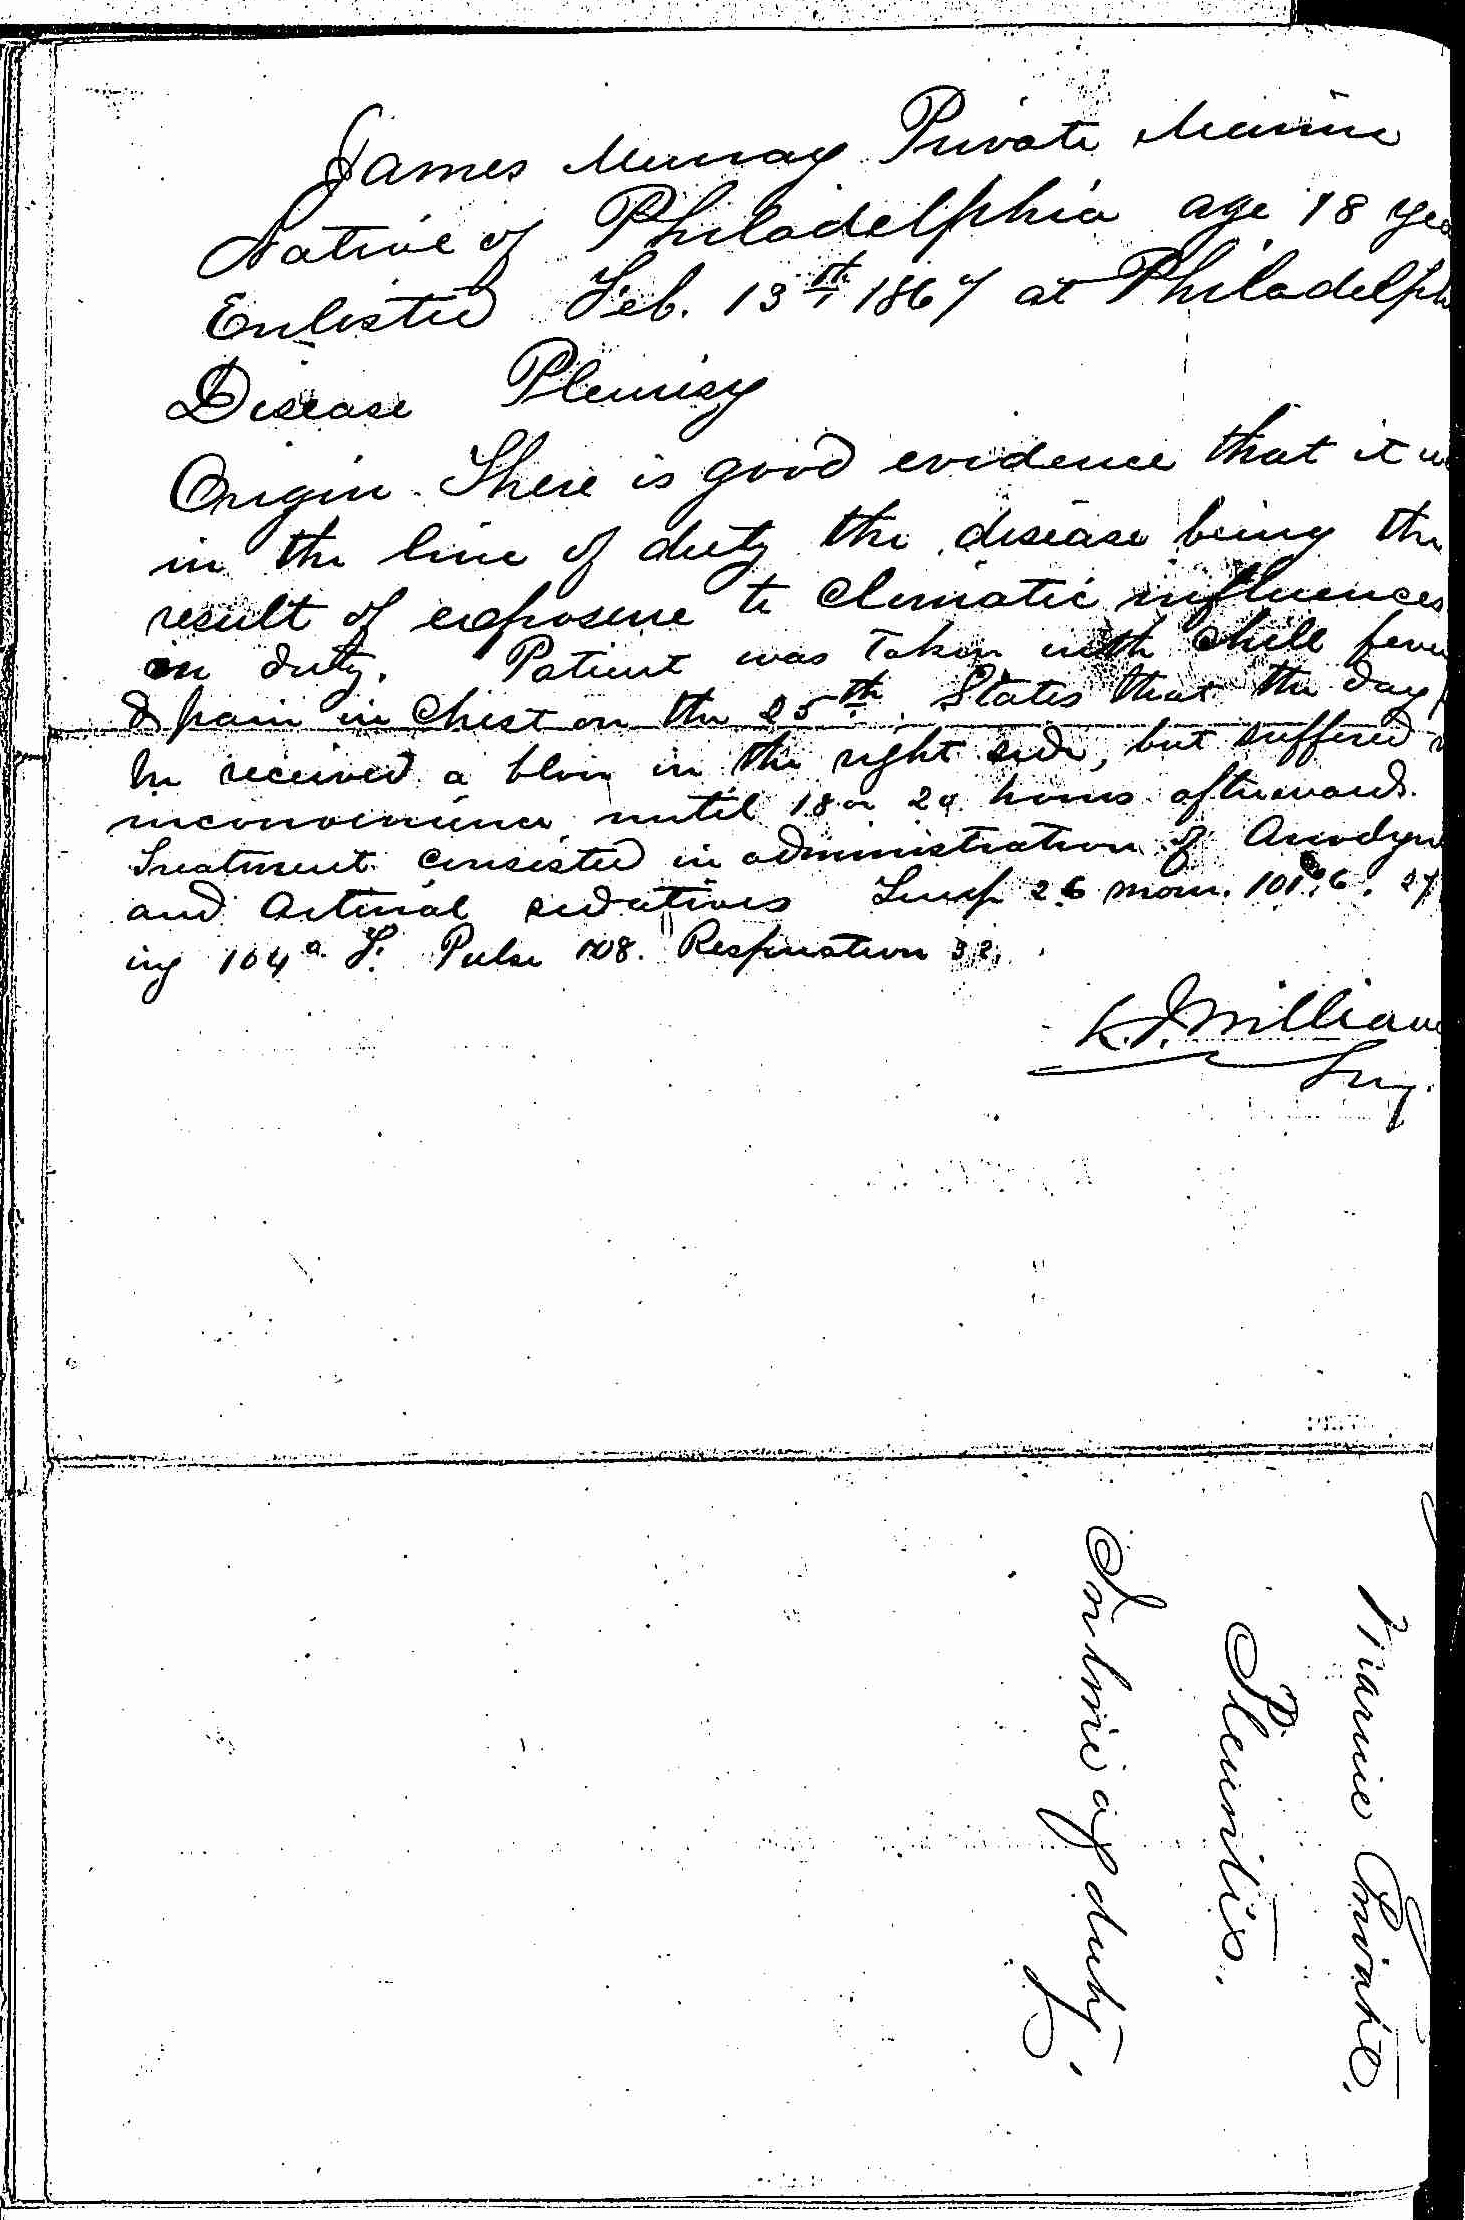 Entry for James Murray (page 2 of 2) in the log Hospital Tickets and Case Papers - Naval Hospital - Washington, D.C. - 1866-68